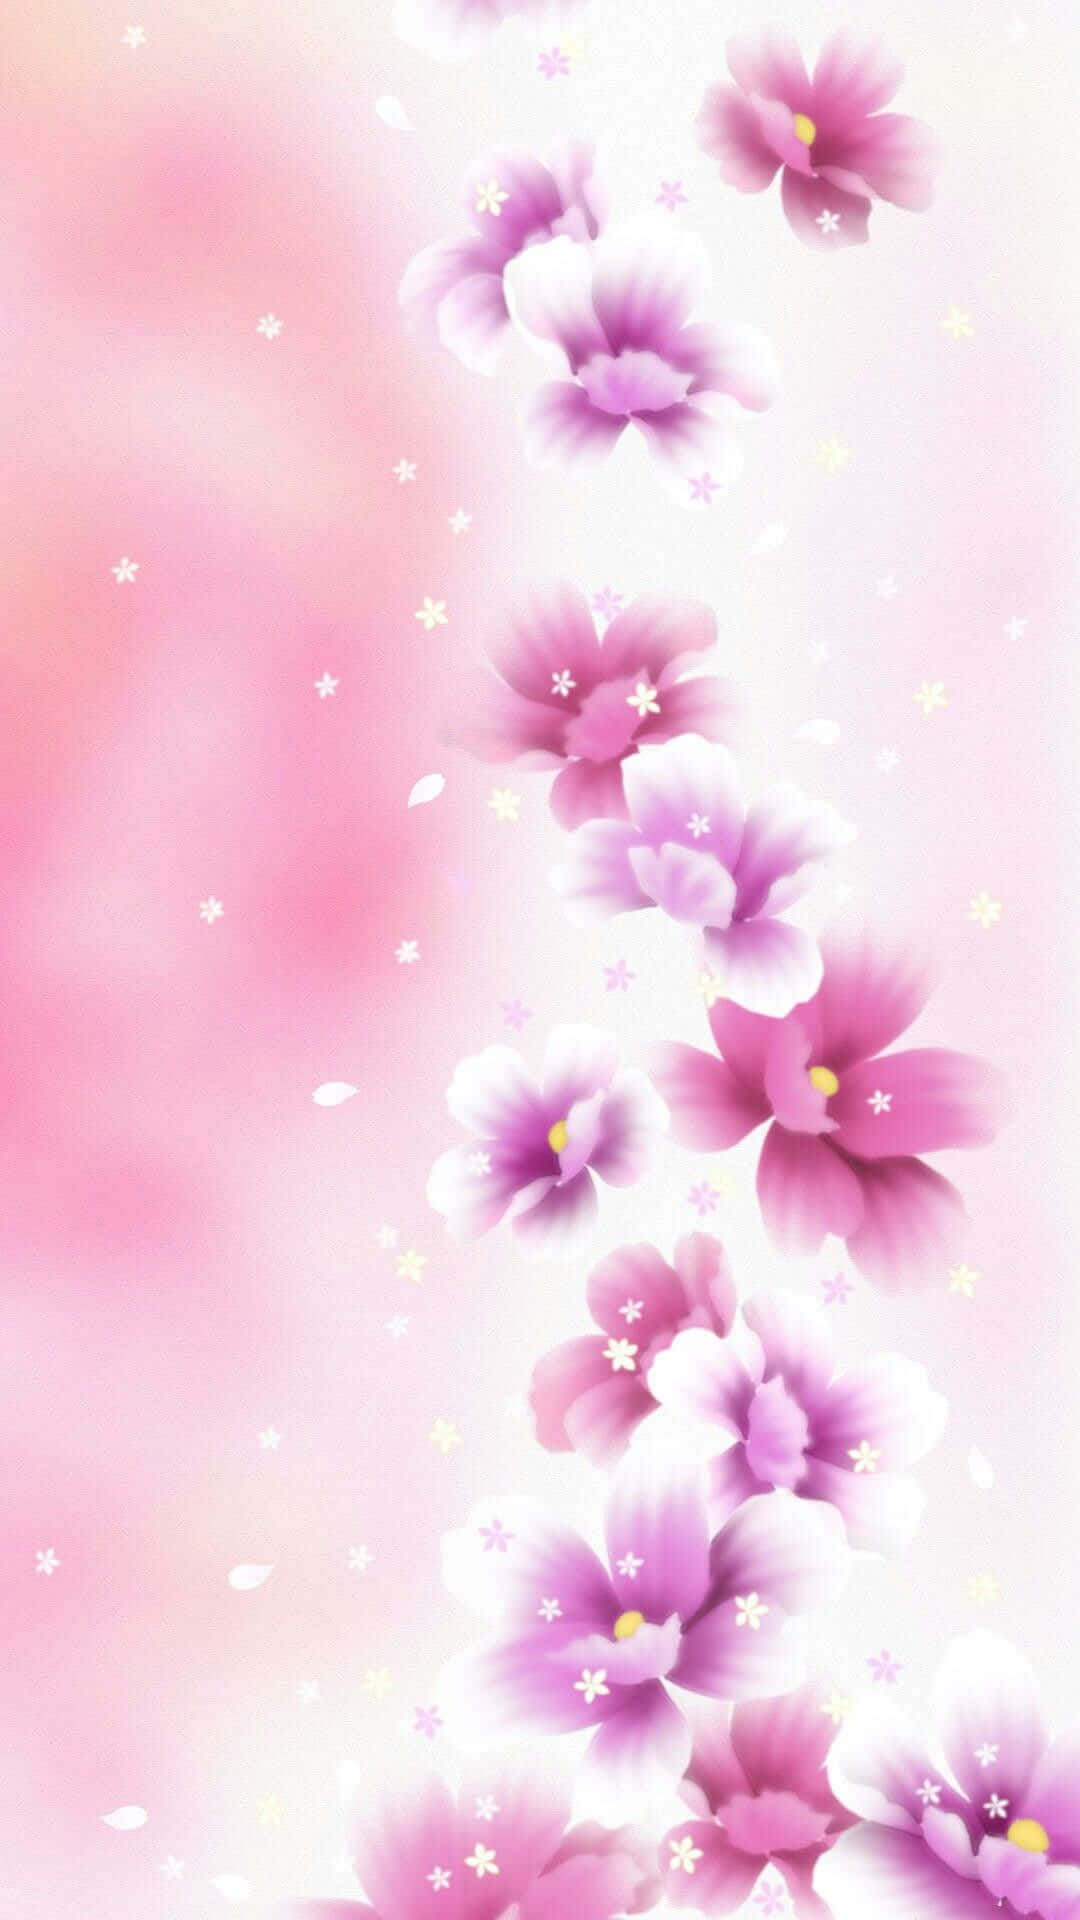 Pink Flowers Wallpaper - Wallpapers For Android Wallpaper